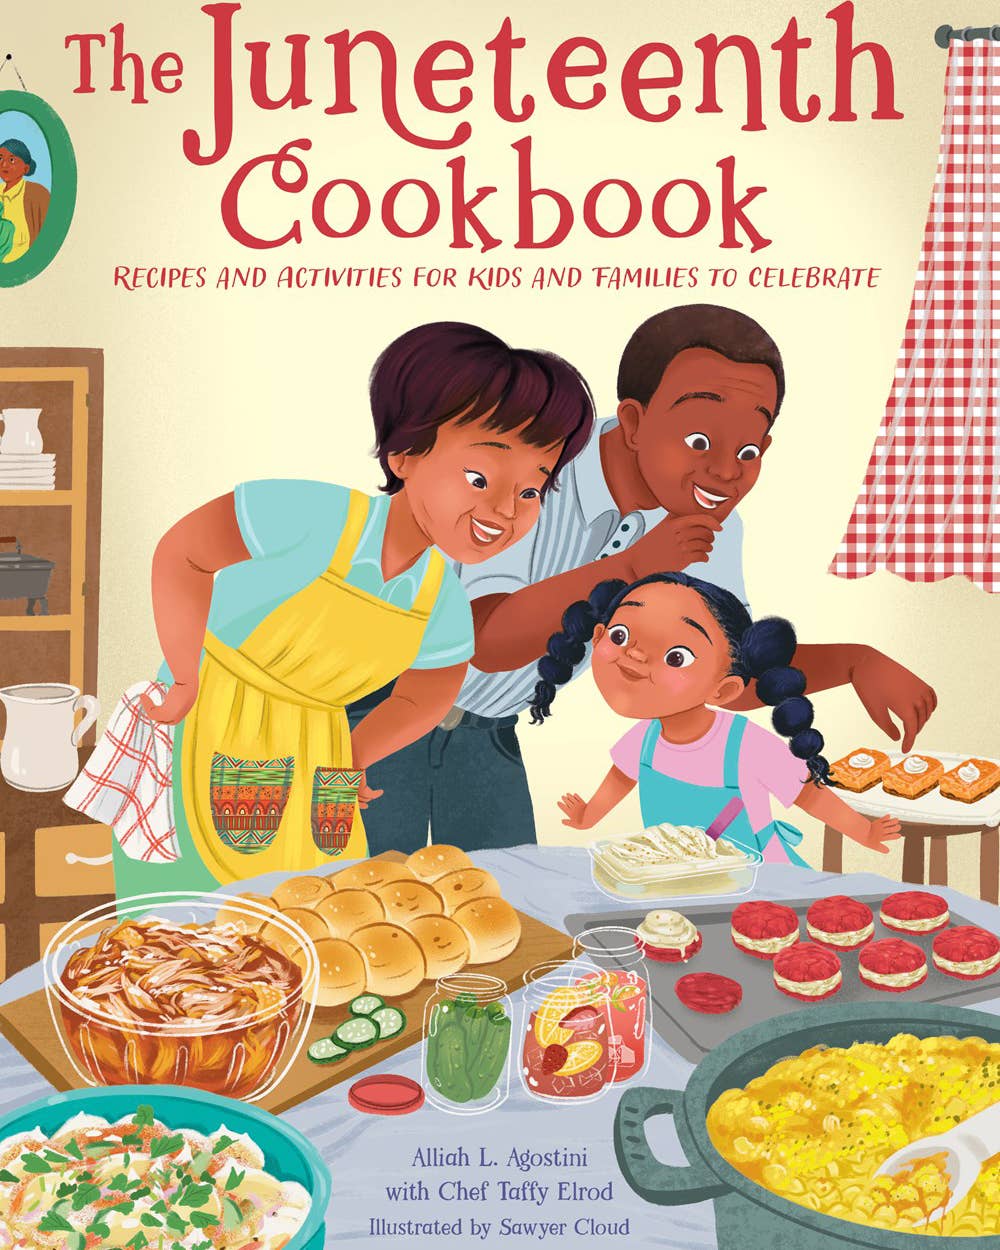 A Juneteenth Cookbook for the Whole Family